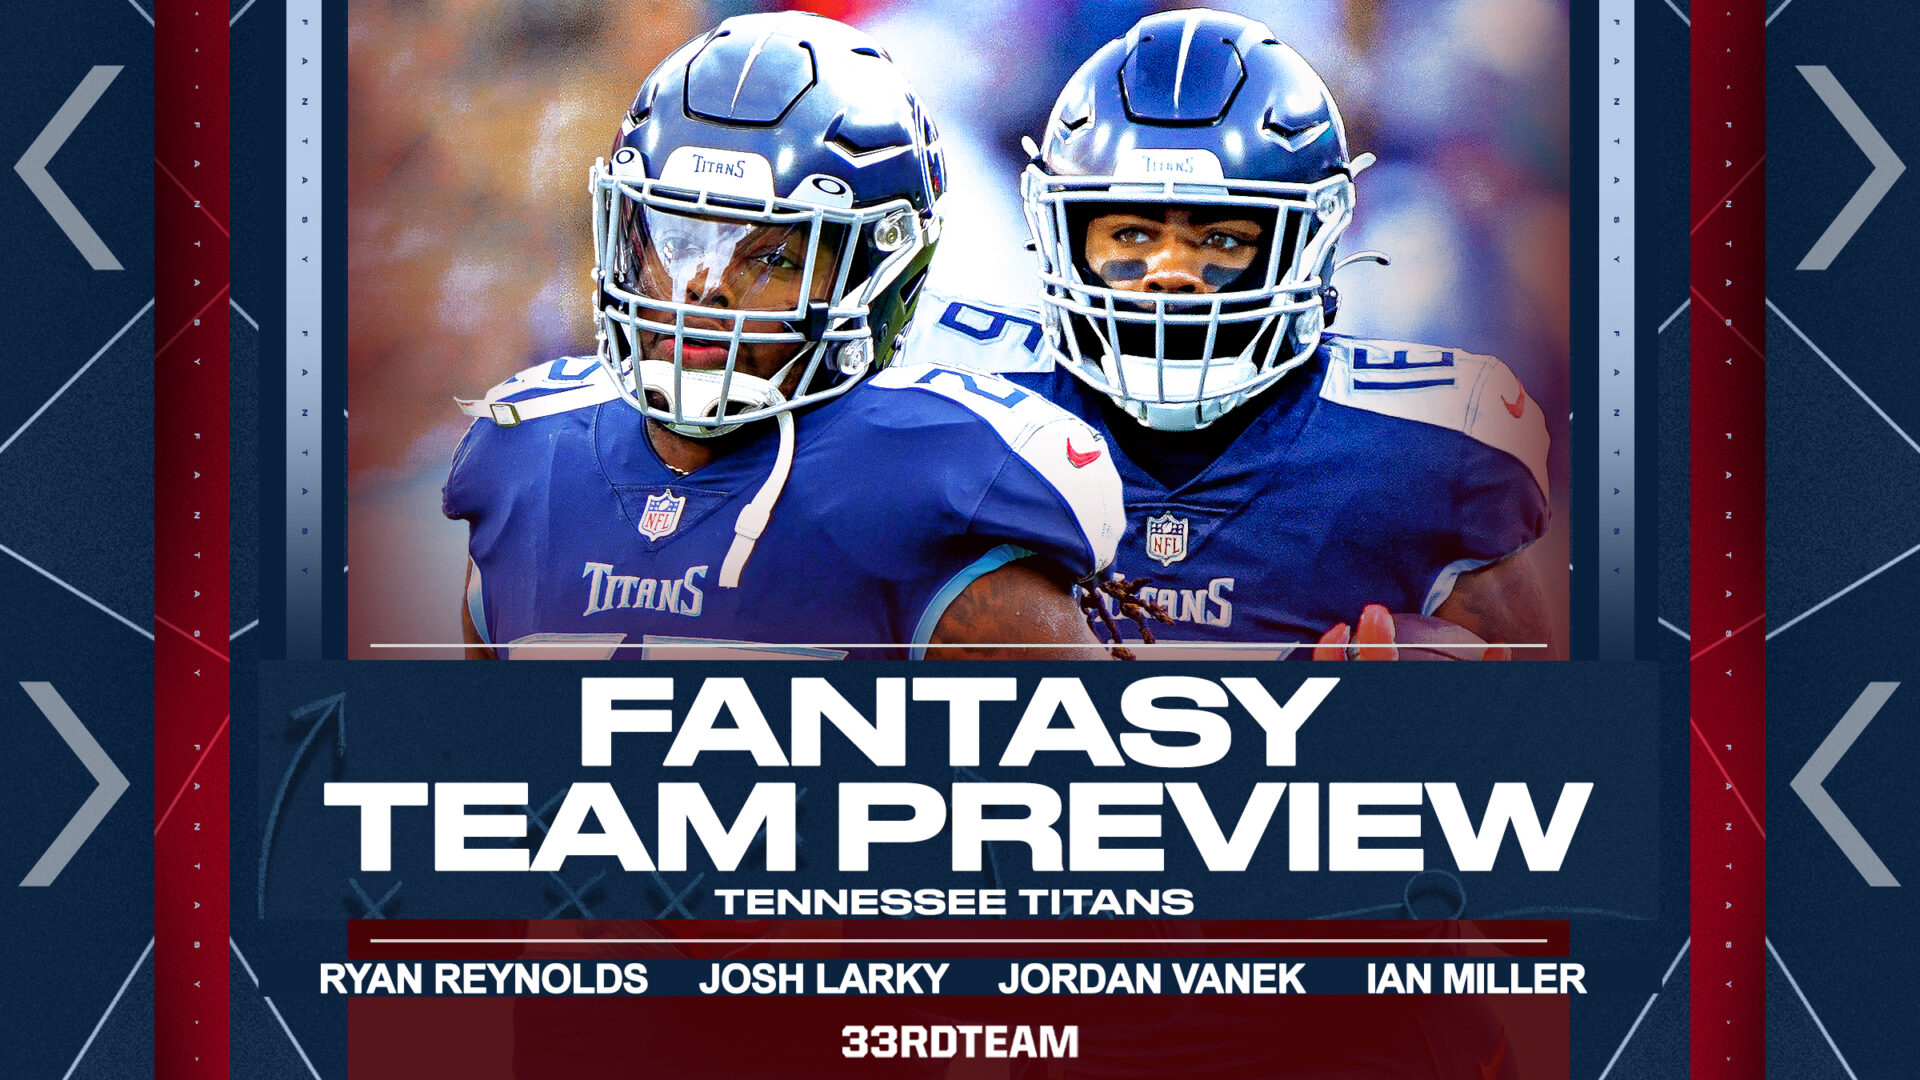 Graphic of Derrick Henry and Treylon Burks and text that reads "Fantasy Team Preview, Tennessee Titans"